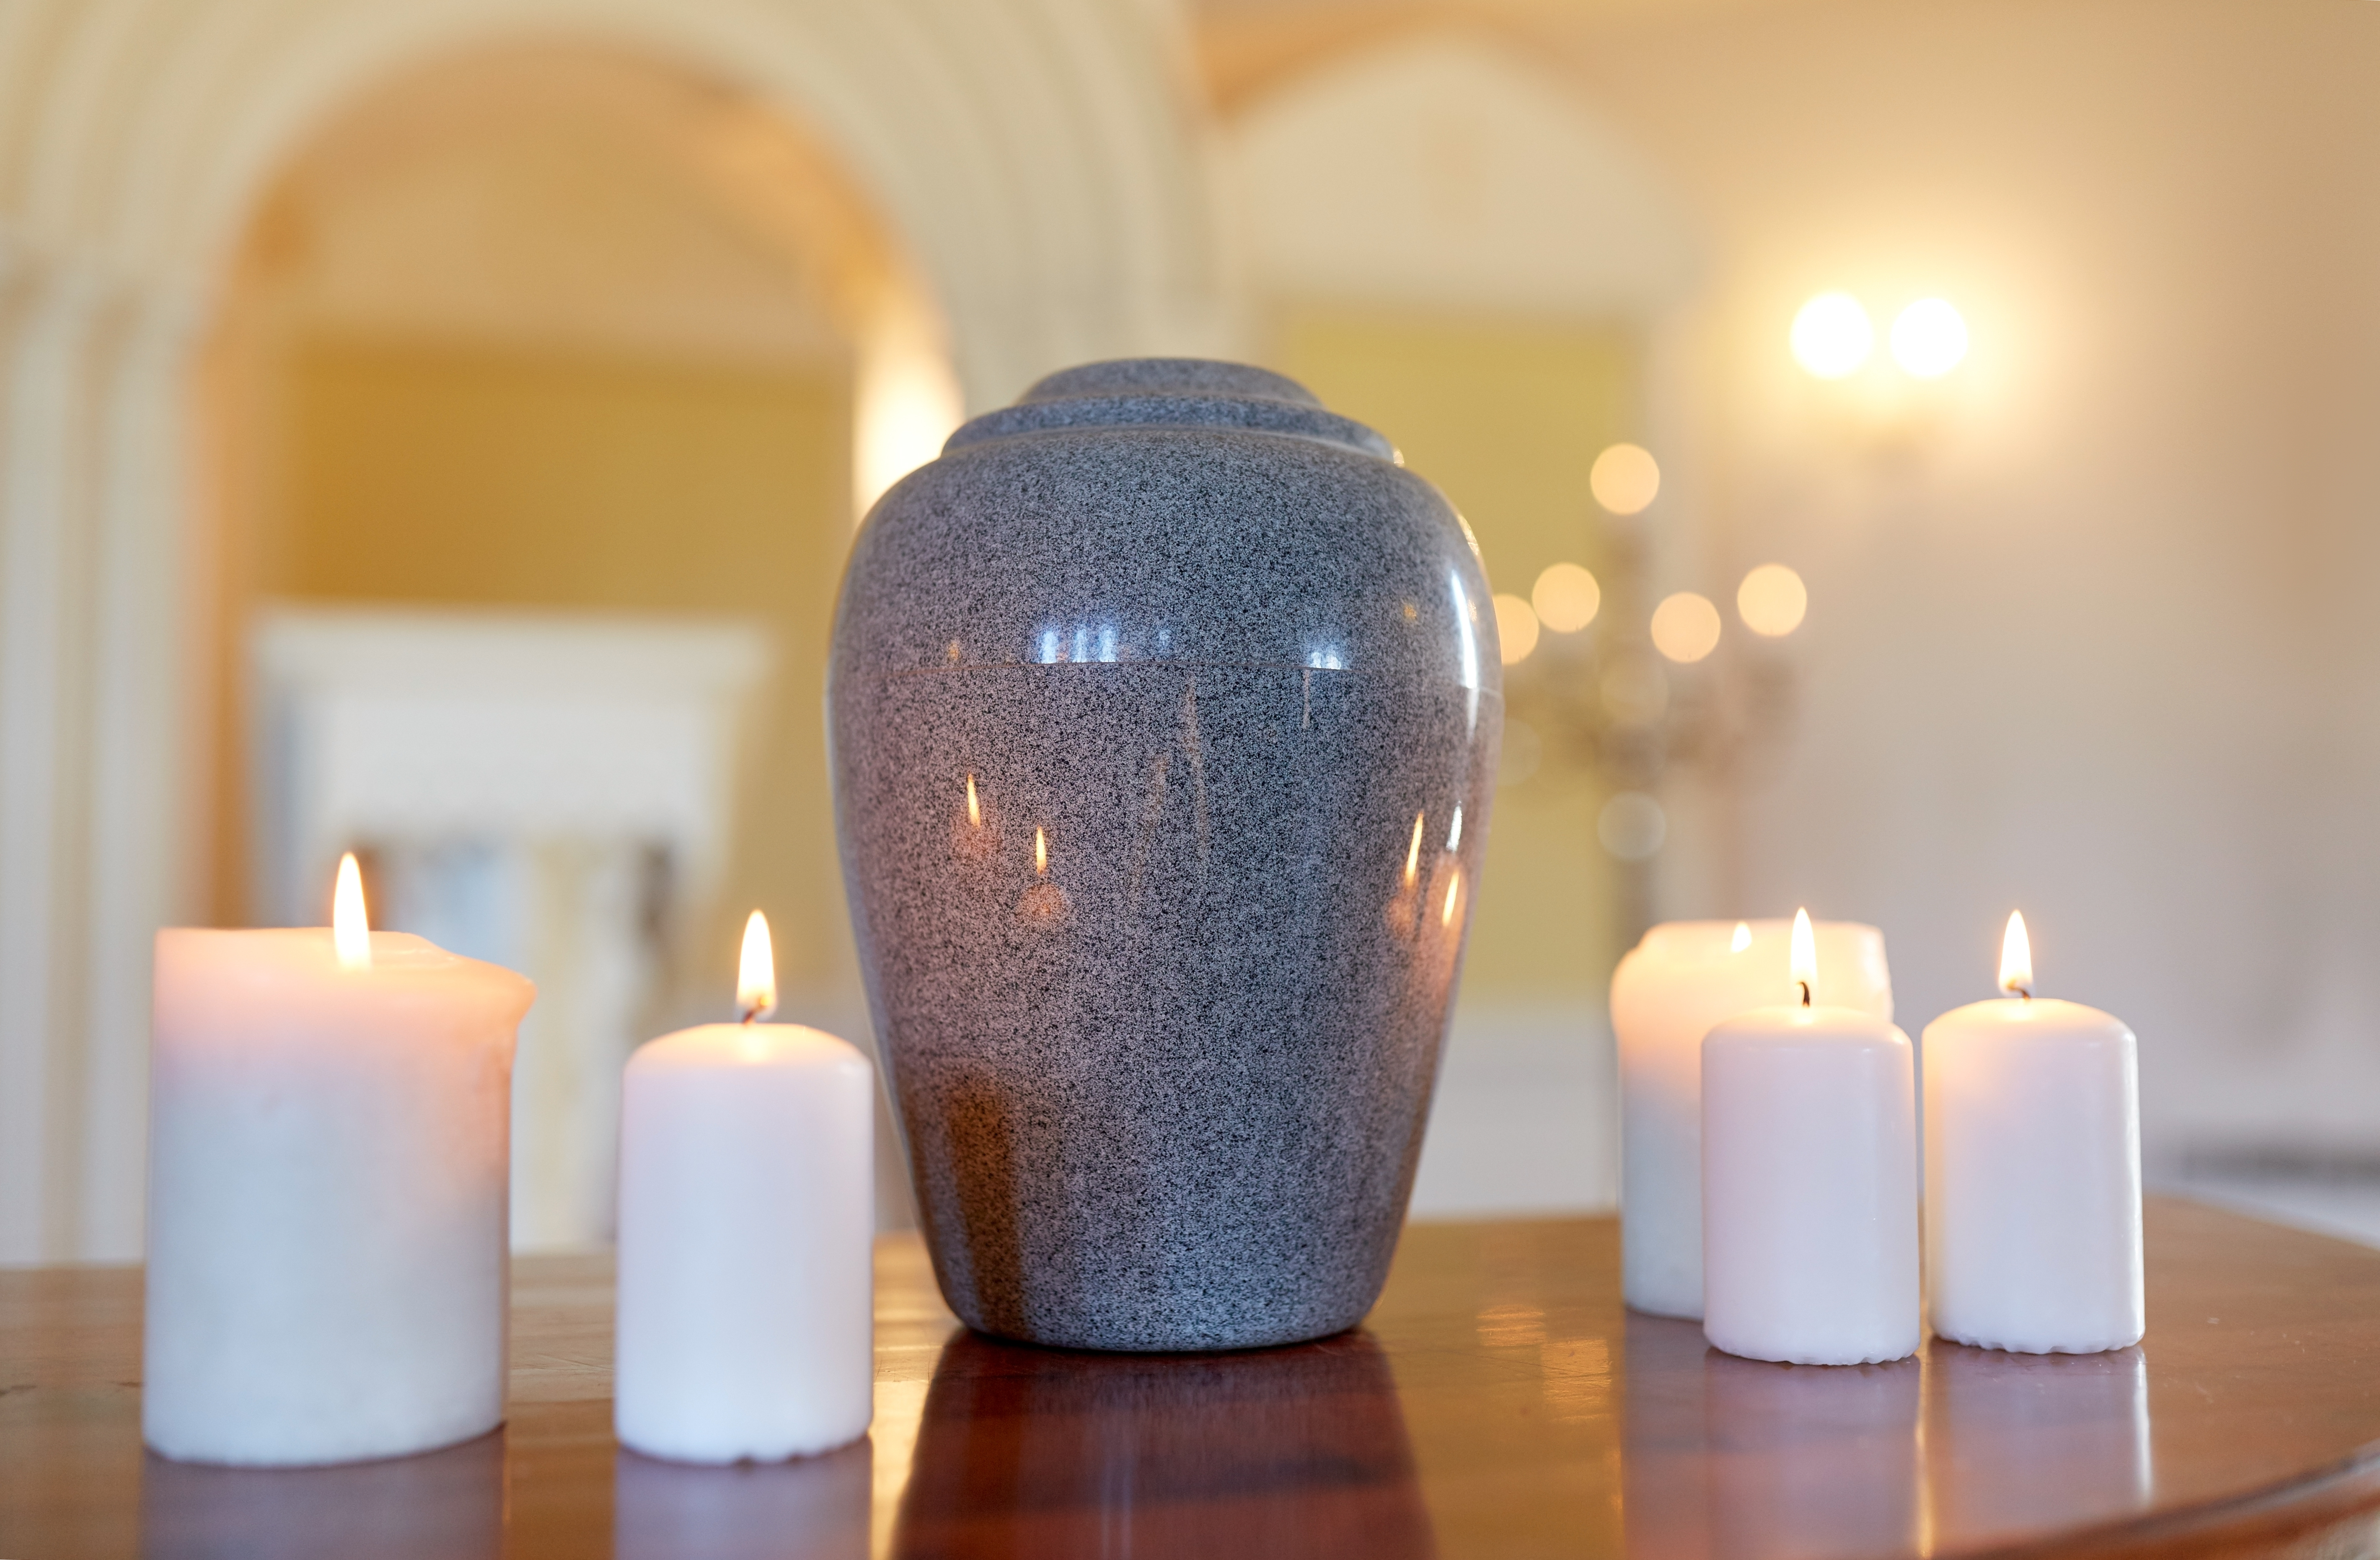 A vase along with some candles on the table